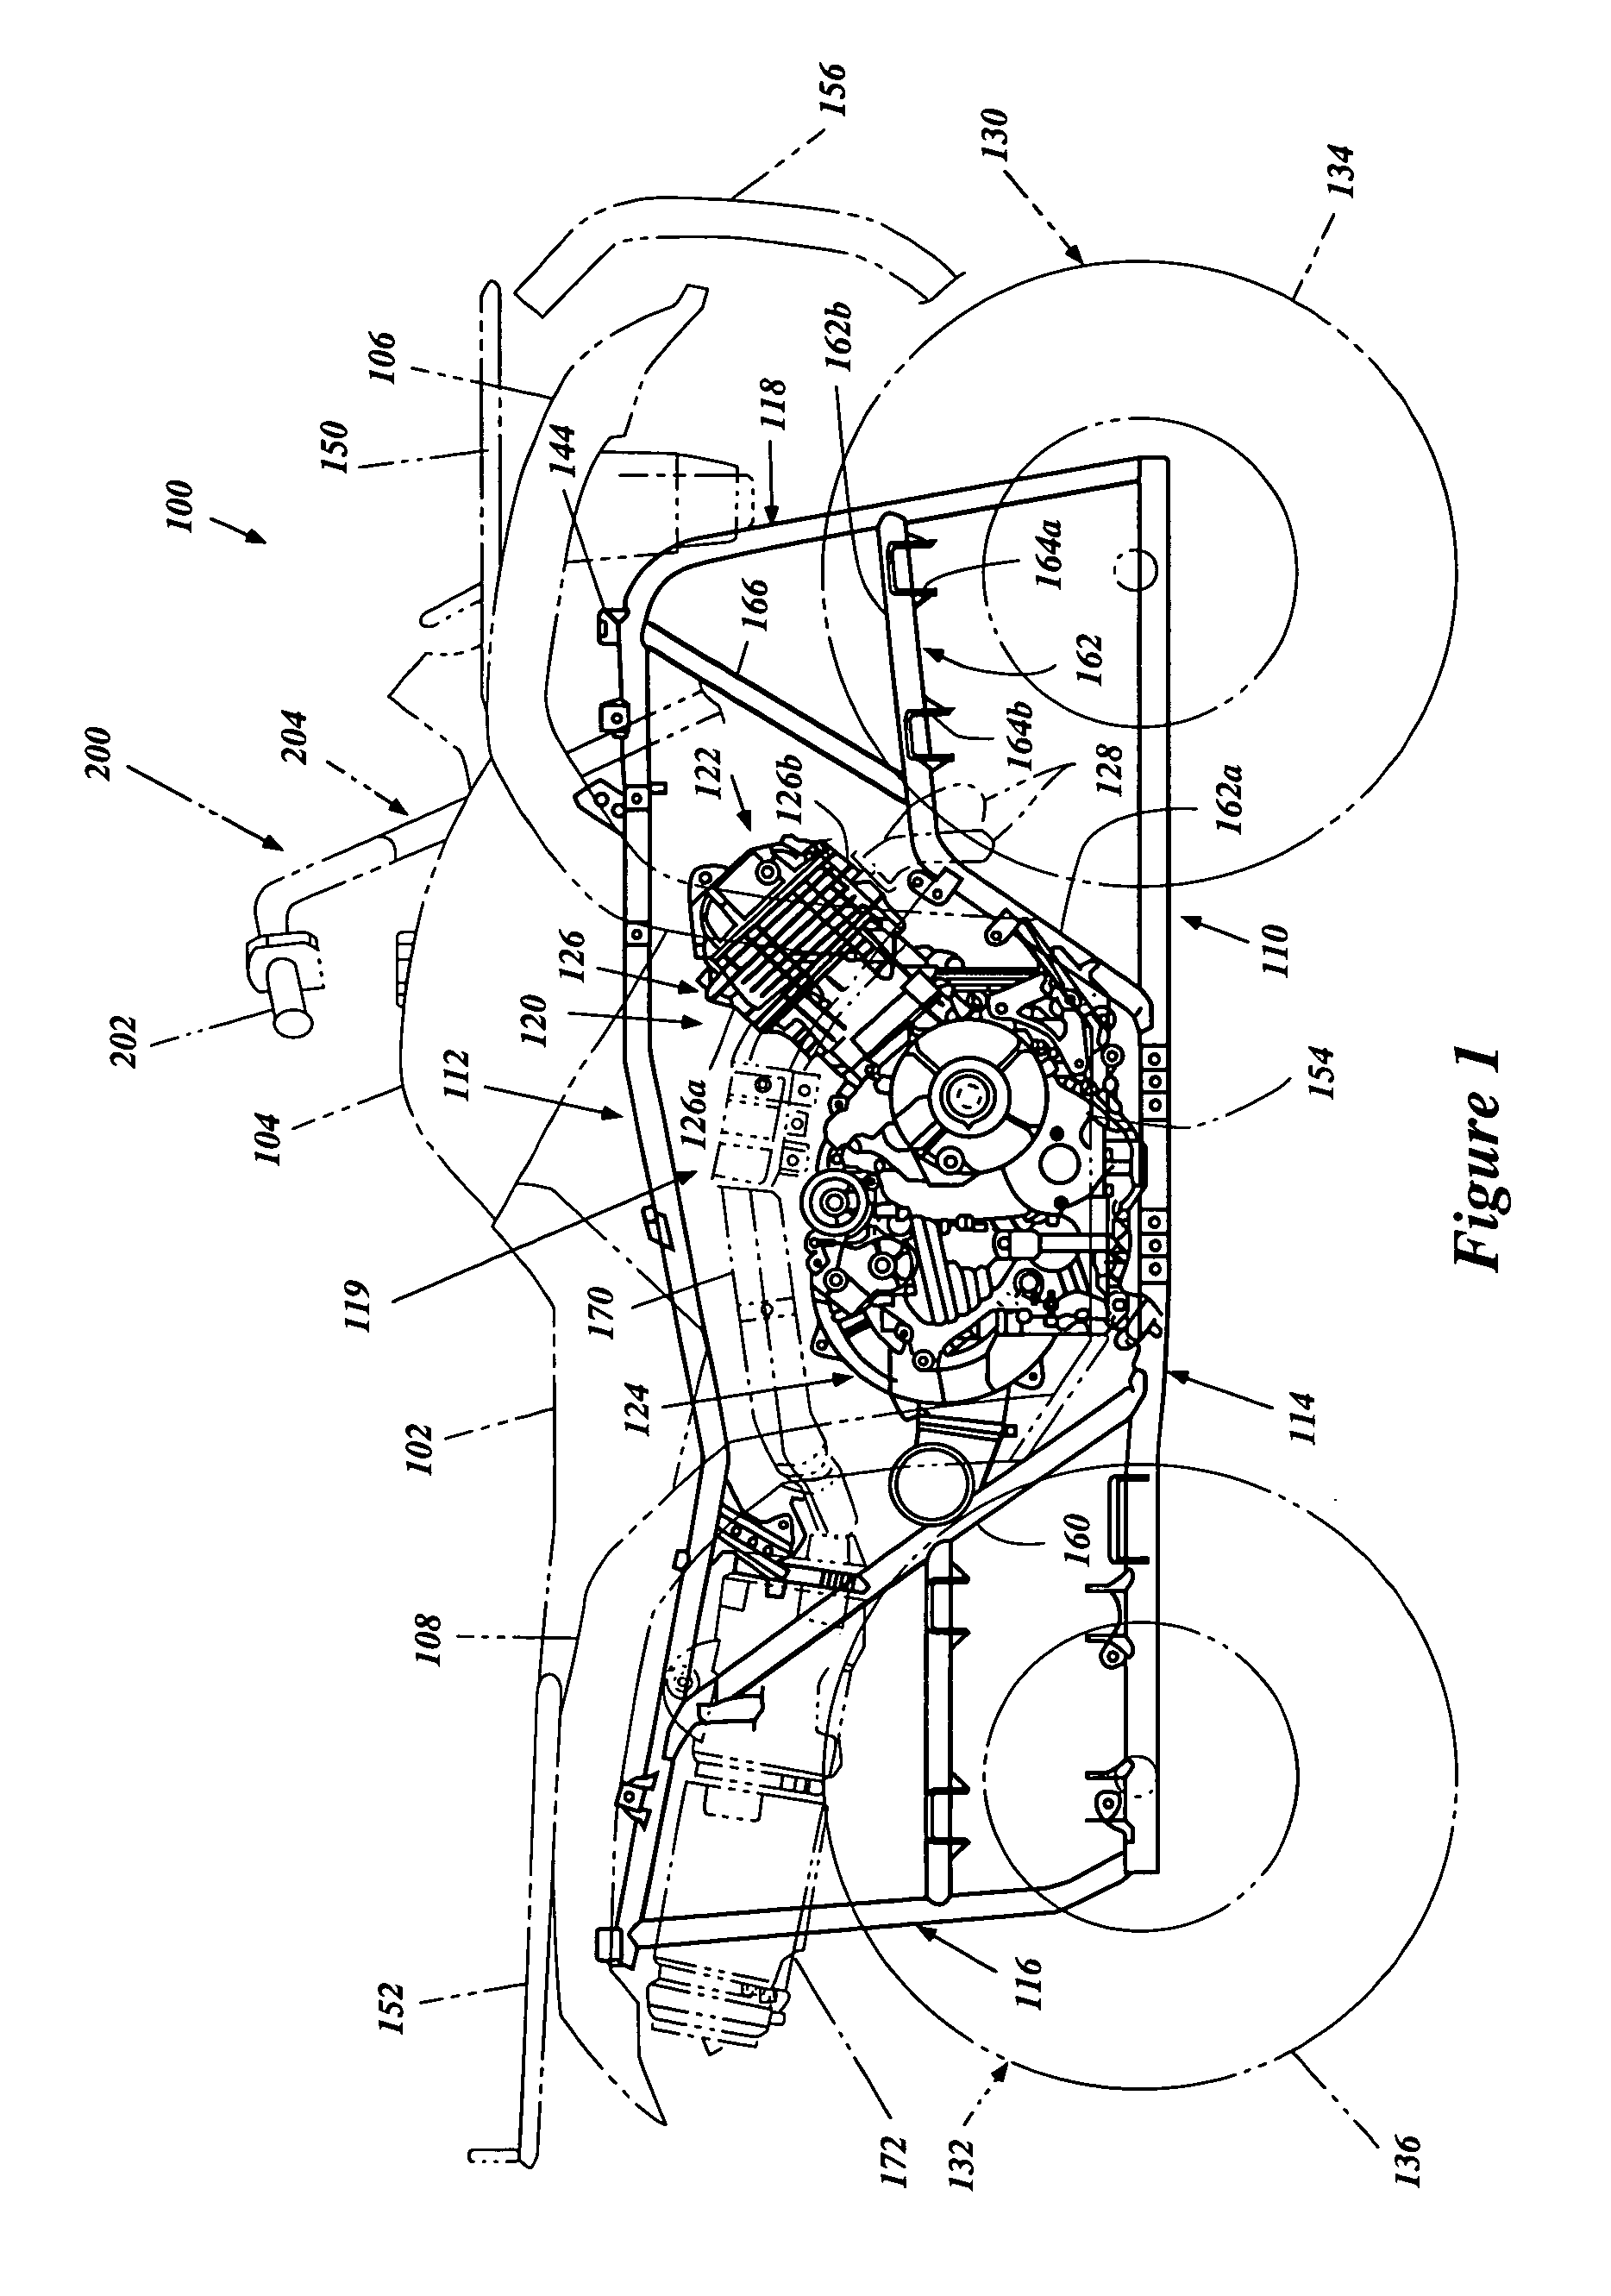 Small vehicle with power steering assembly